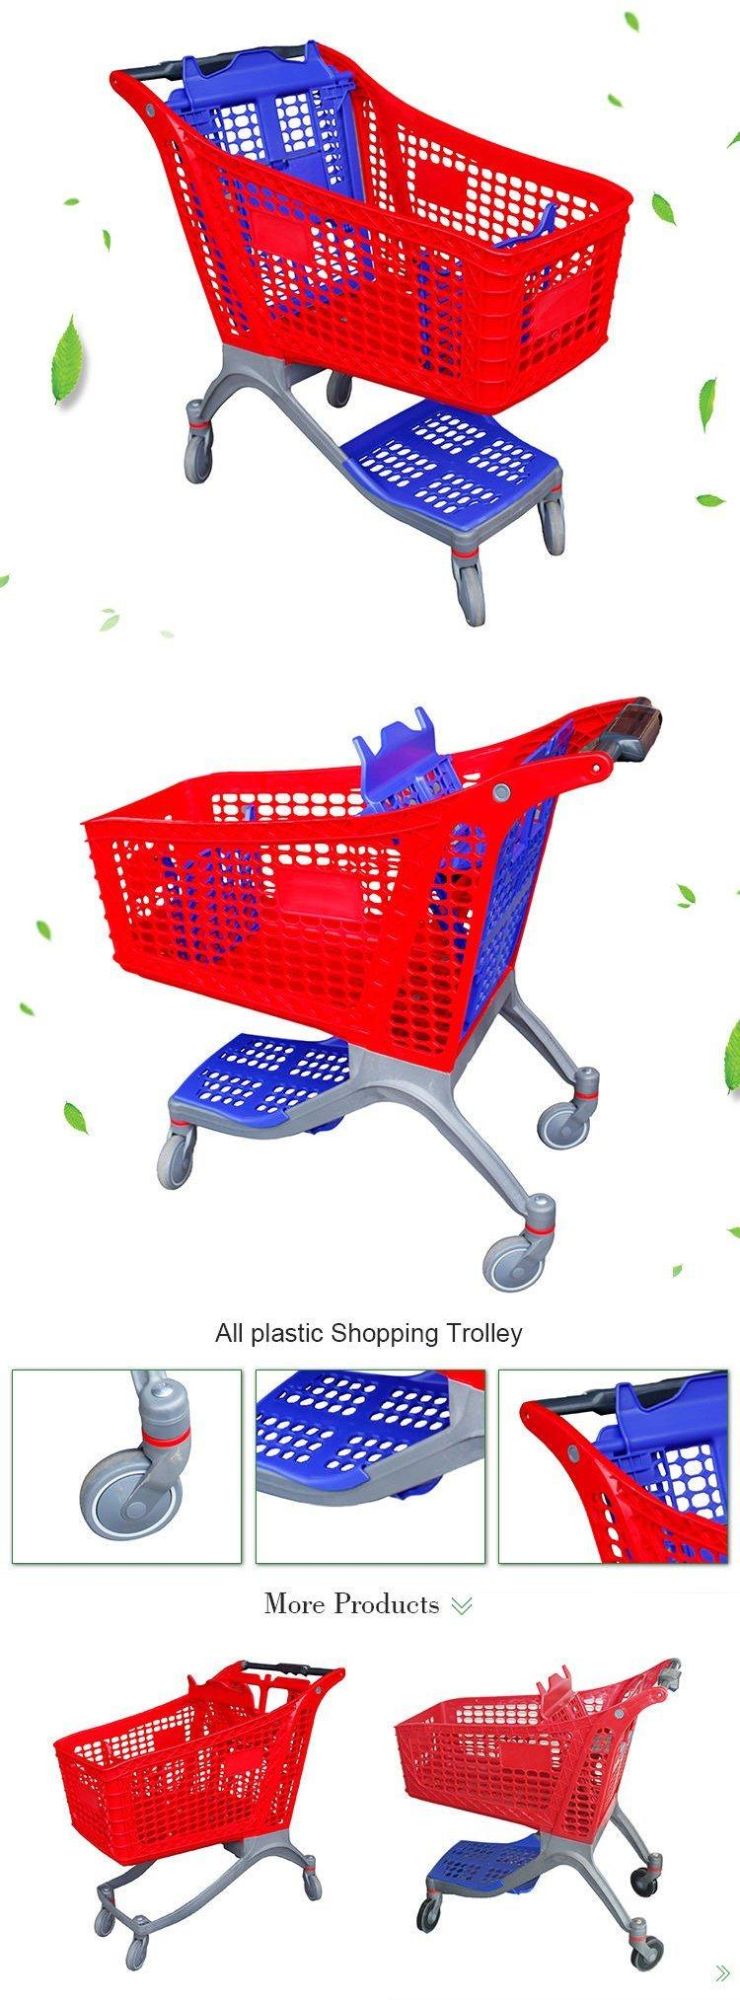 Unfolding Grocery Plastic Supermarket Shopping Cart Trolley